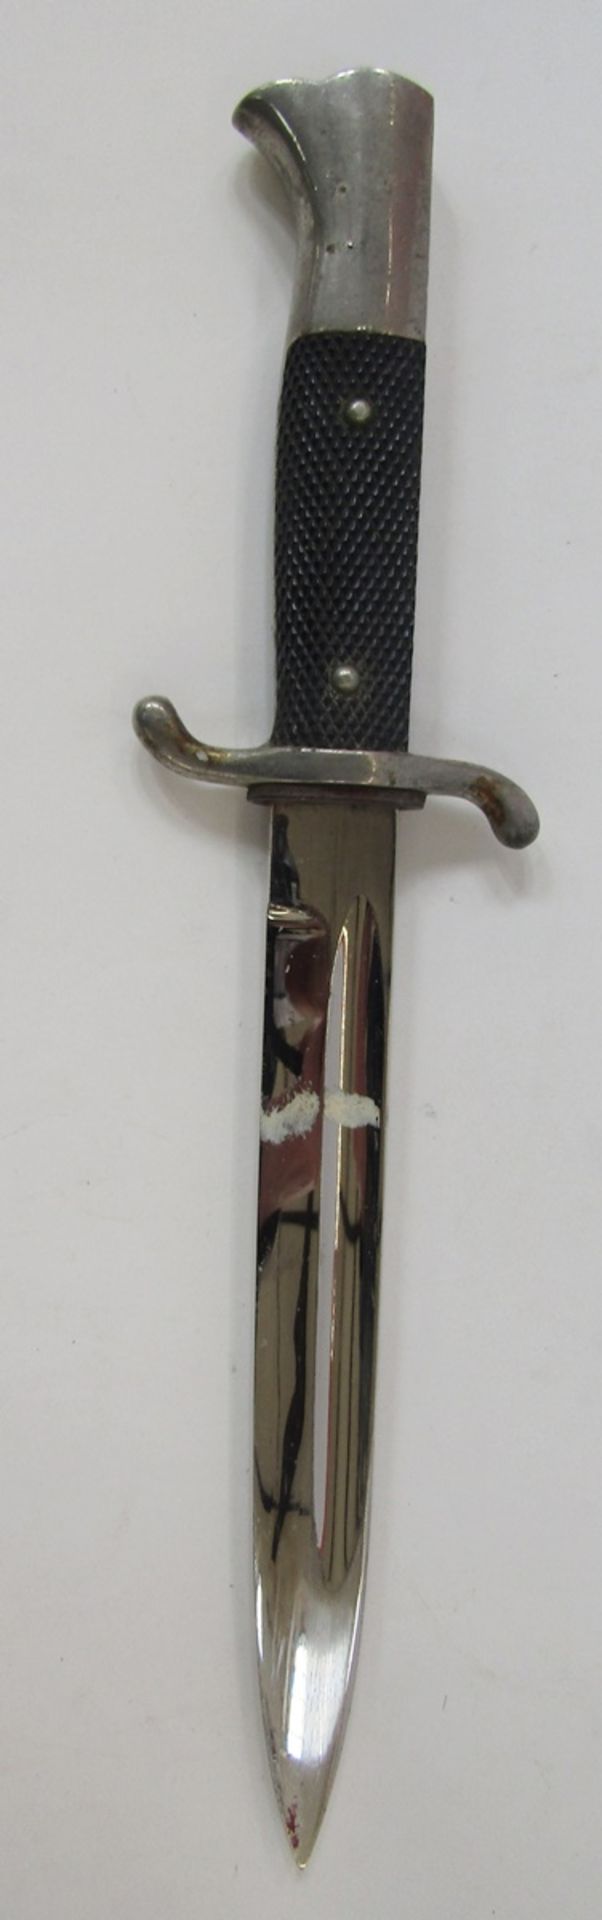 WWII German fireman's dress bayonet with scabbard and bayonet frog. - Image 2 of 3